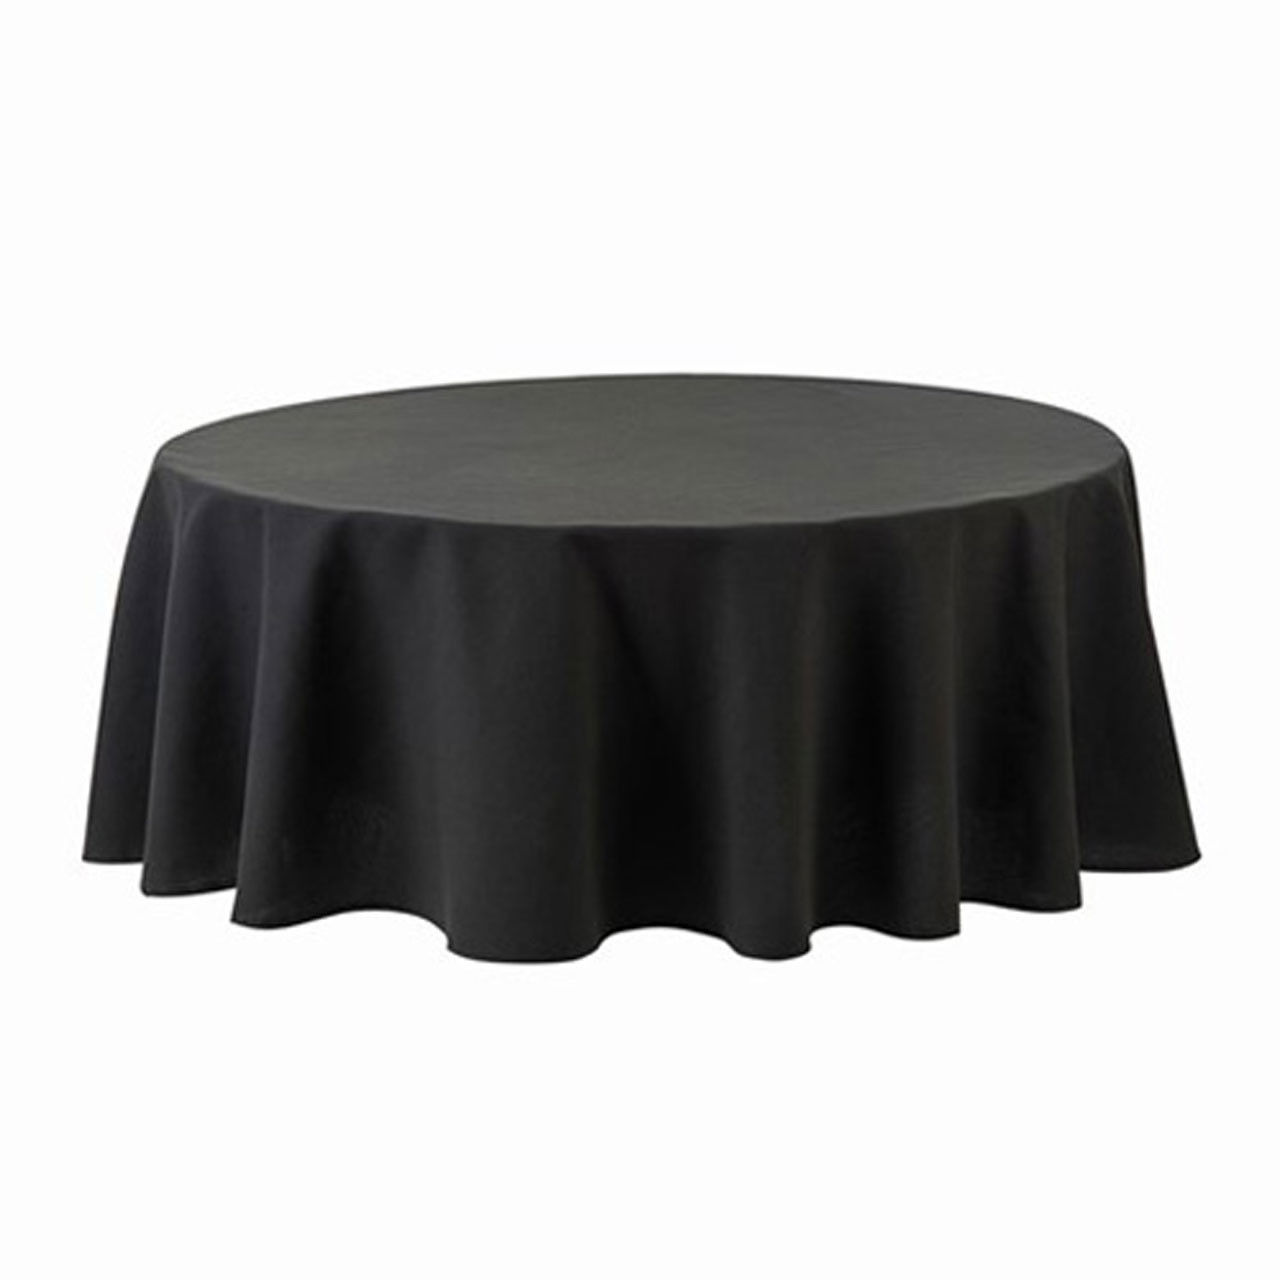 Is there just one black round tablecloth in a case?